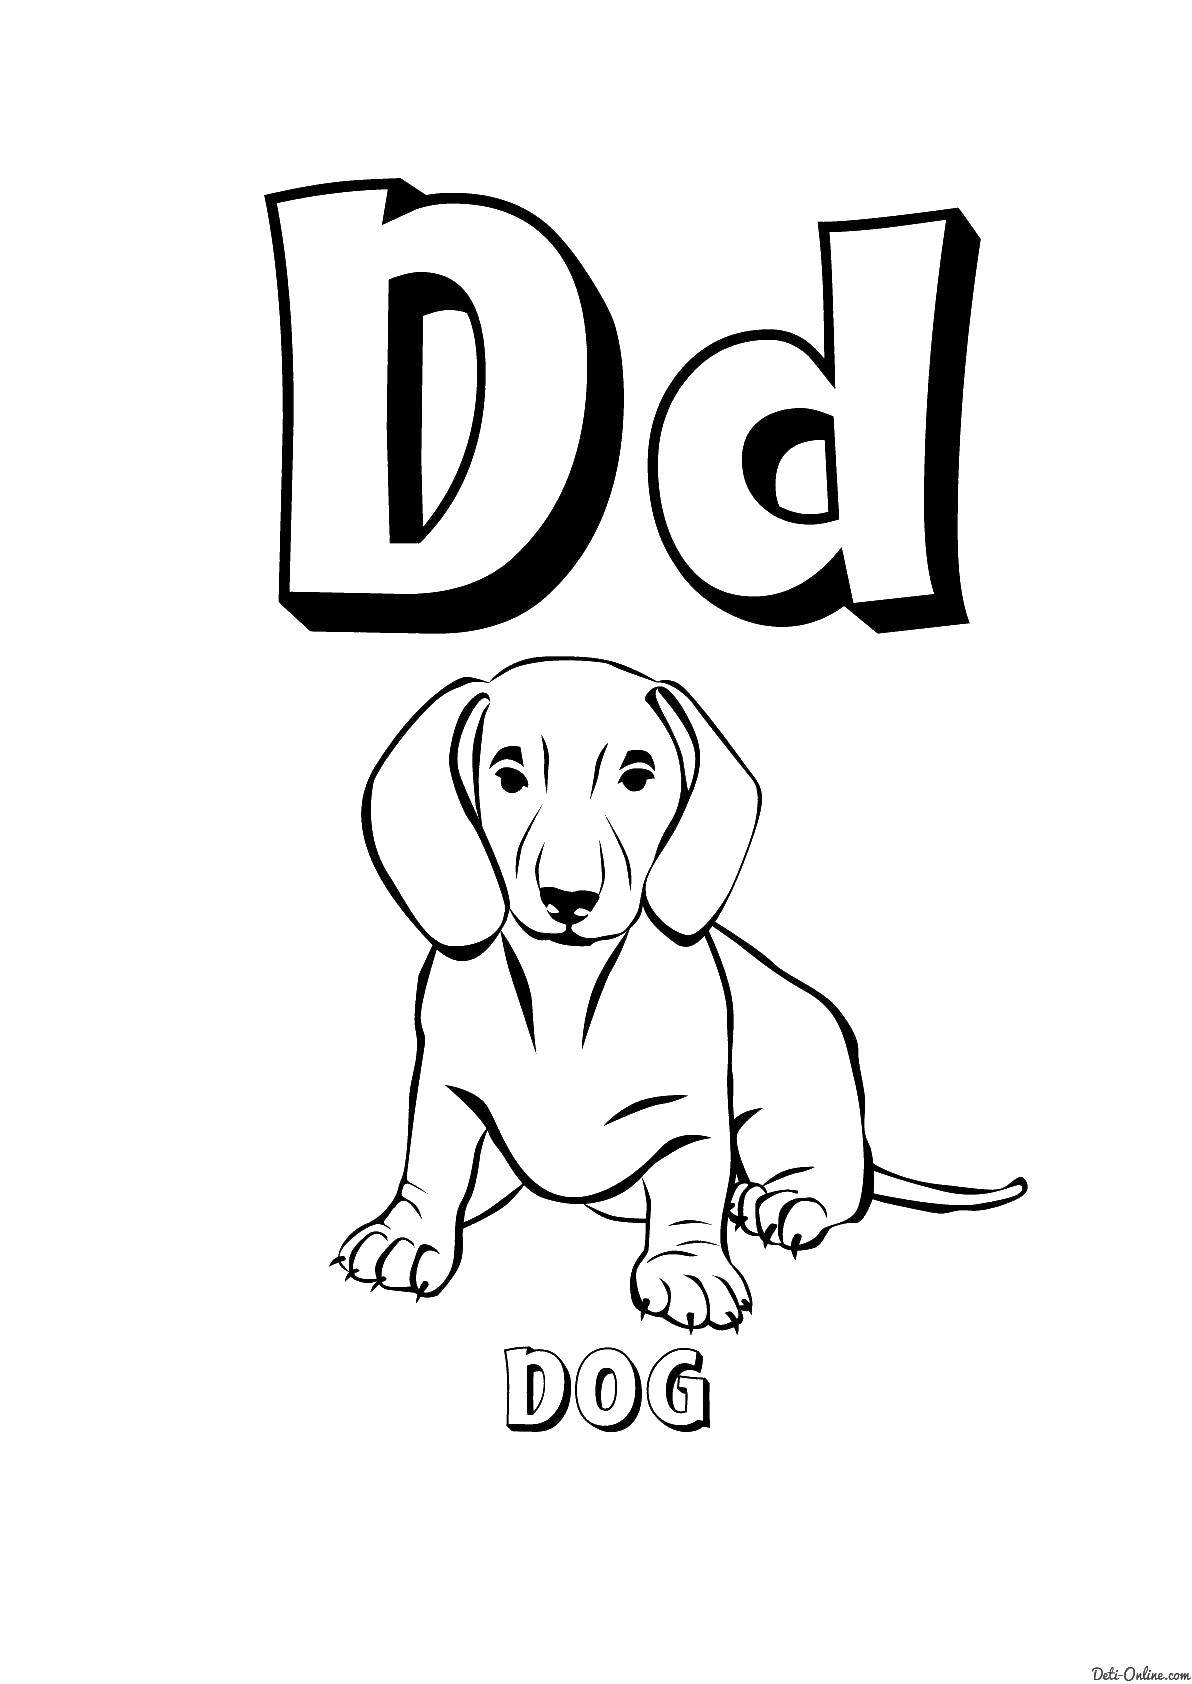 Coloring Letter d. Category English. Tags:  letter D, dog.